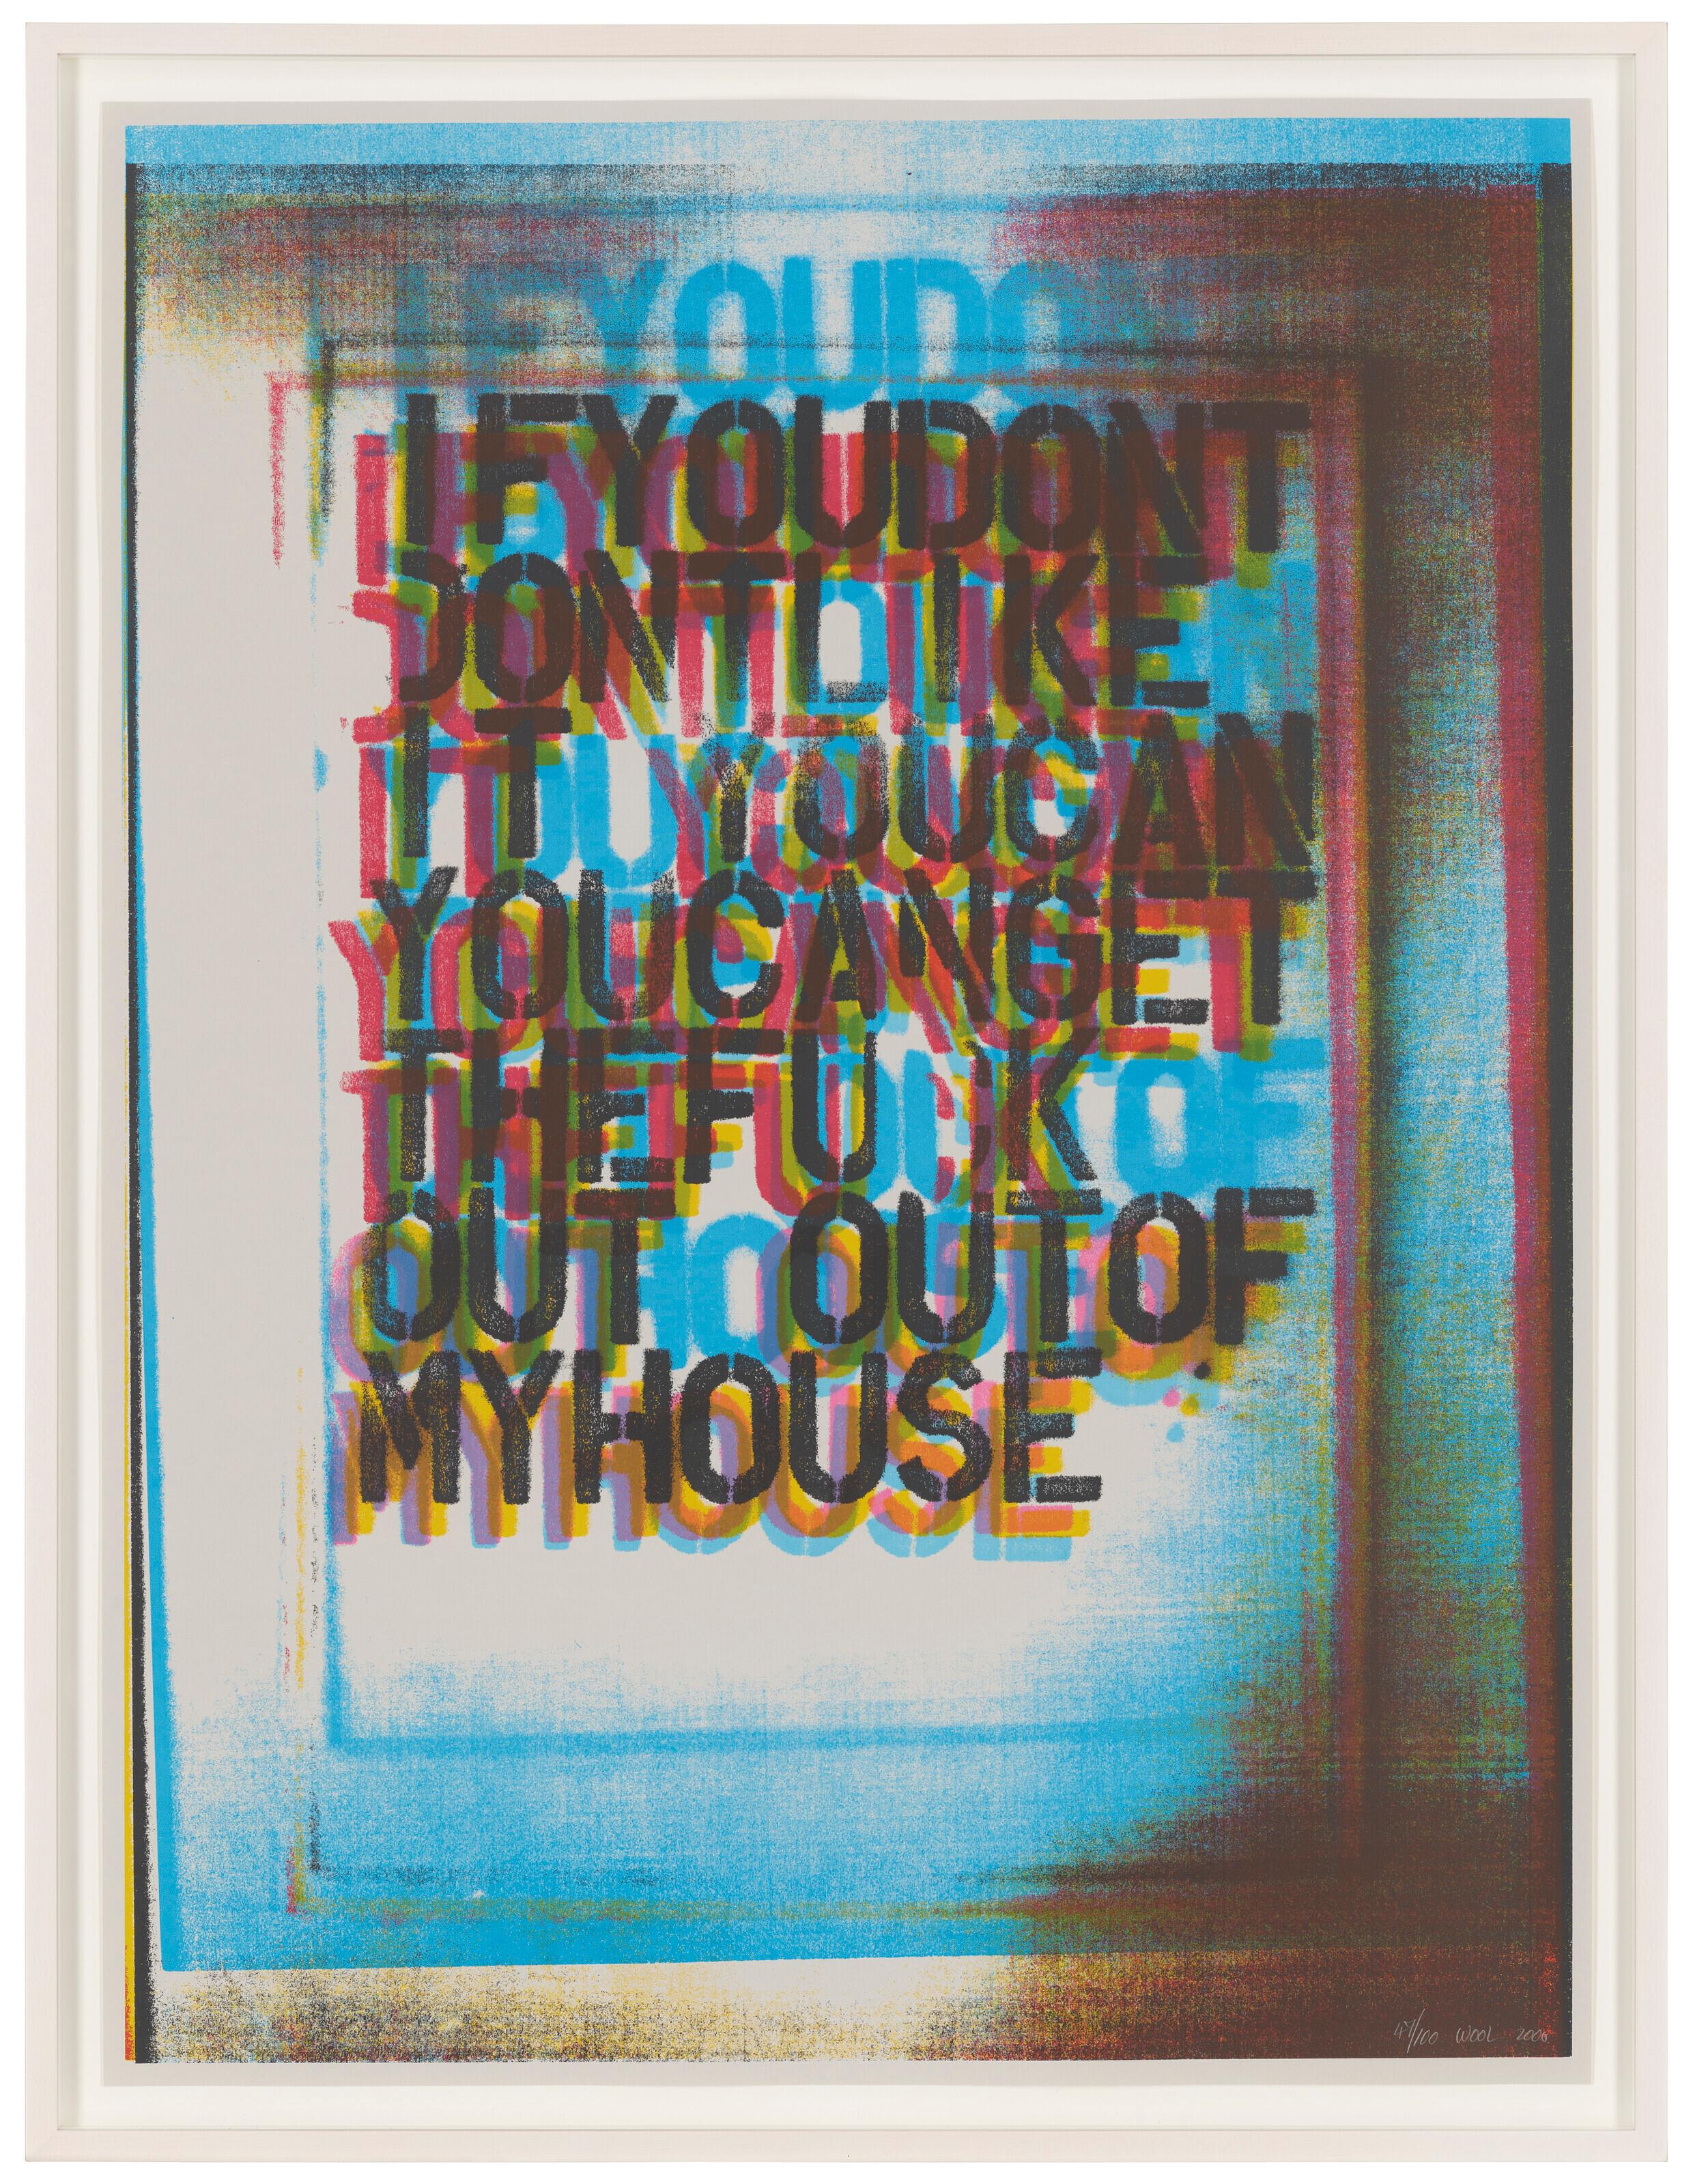 My House II (2) - Print by Christopher Wool